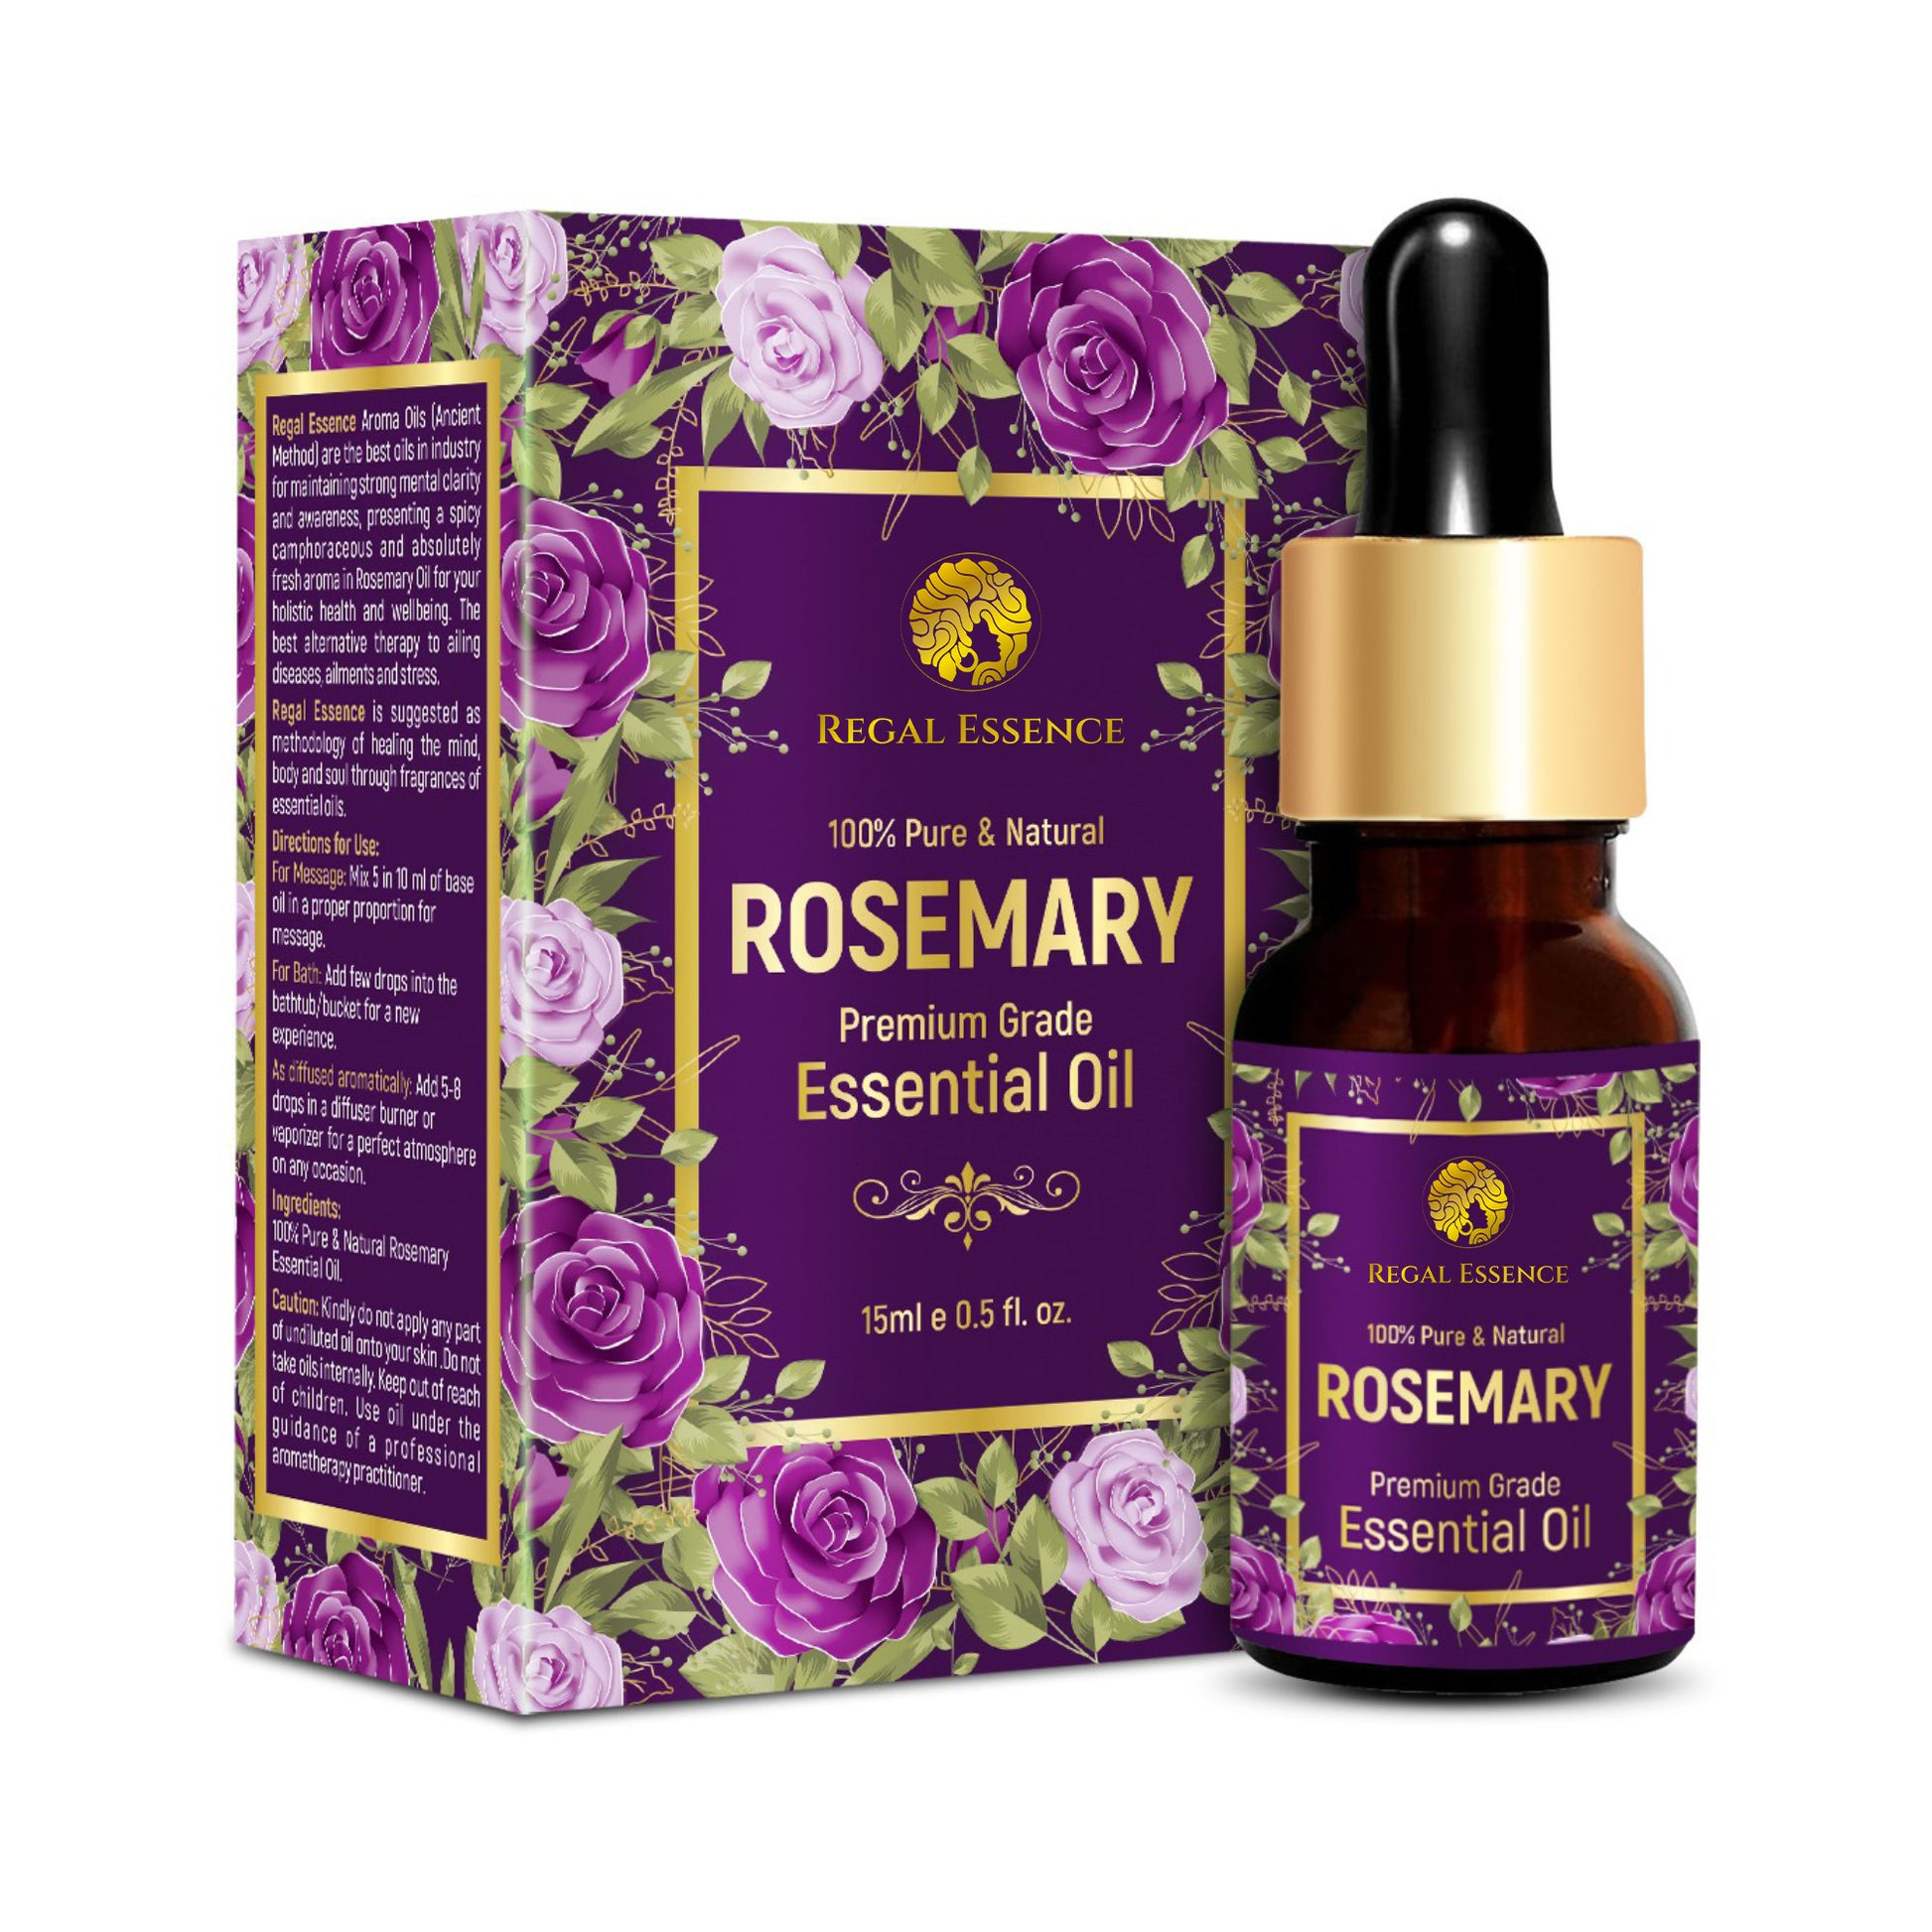 Regal Essence Rosemary Essential Oil, For Skin, Muscle & Joints-15ml Vedapure Naturals